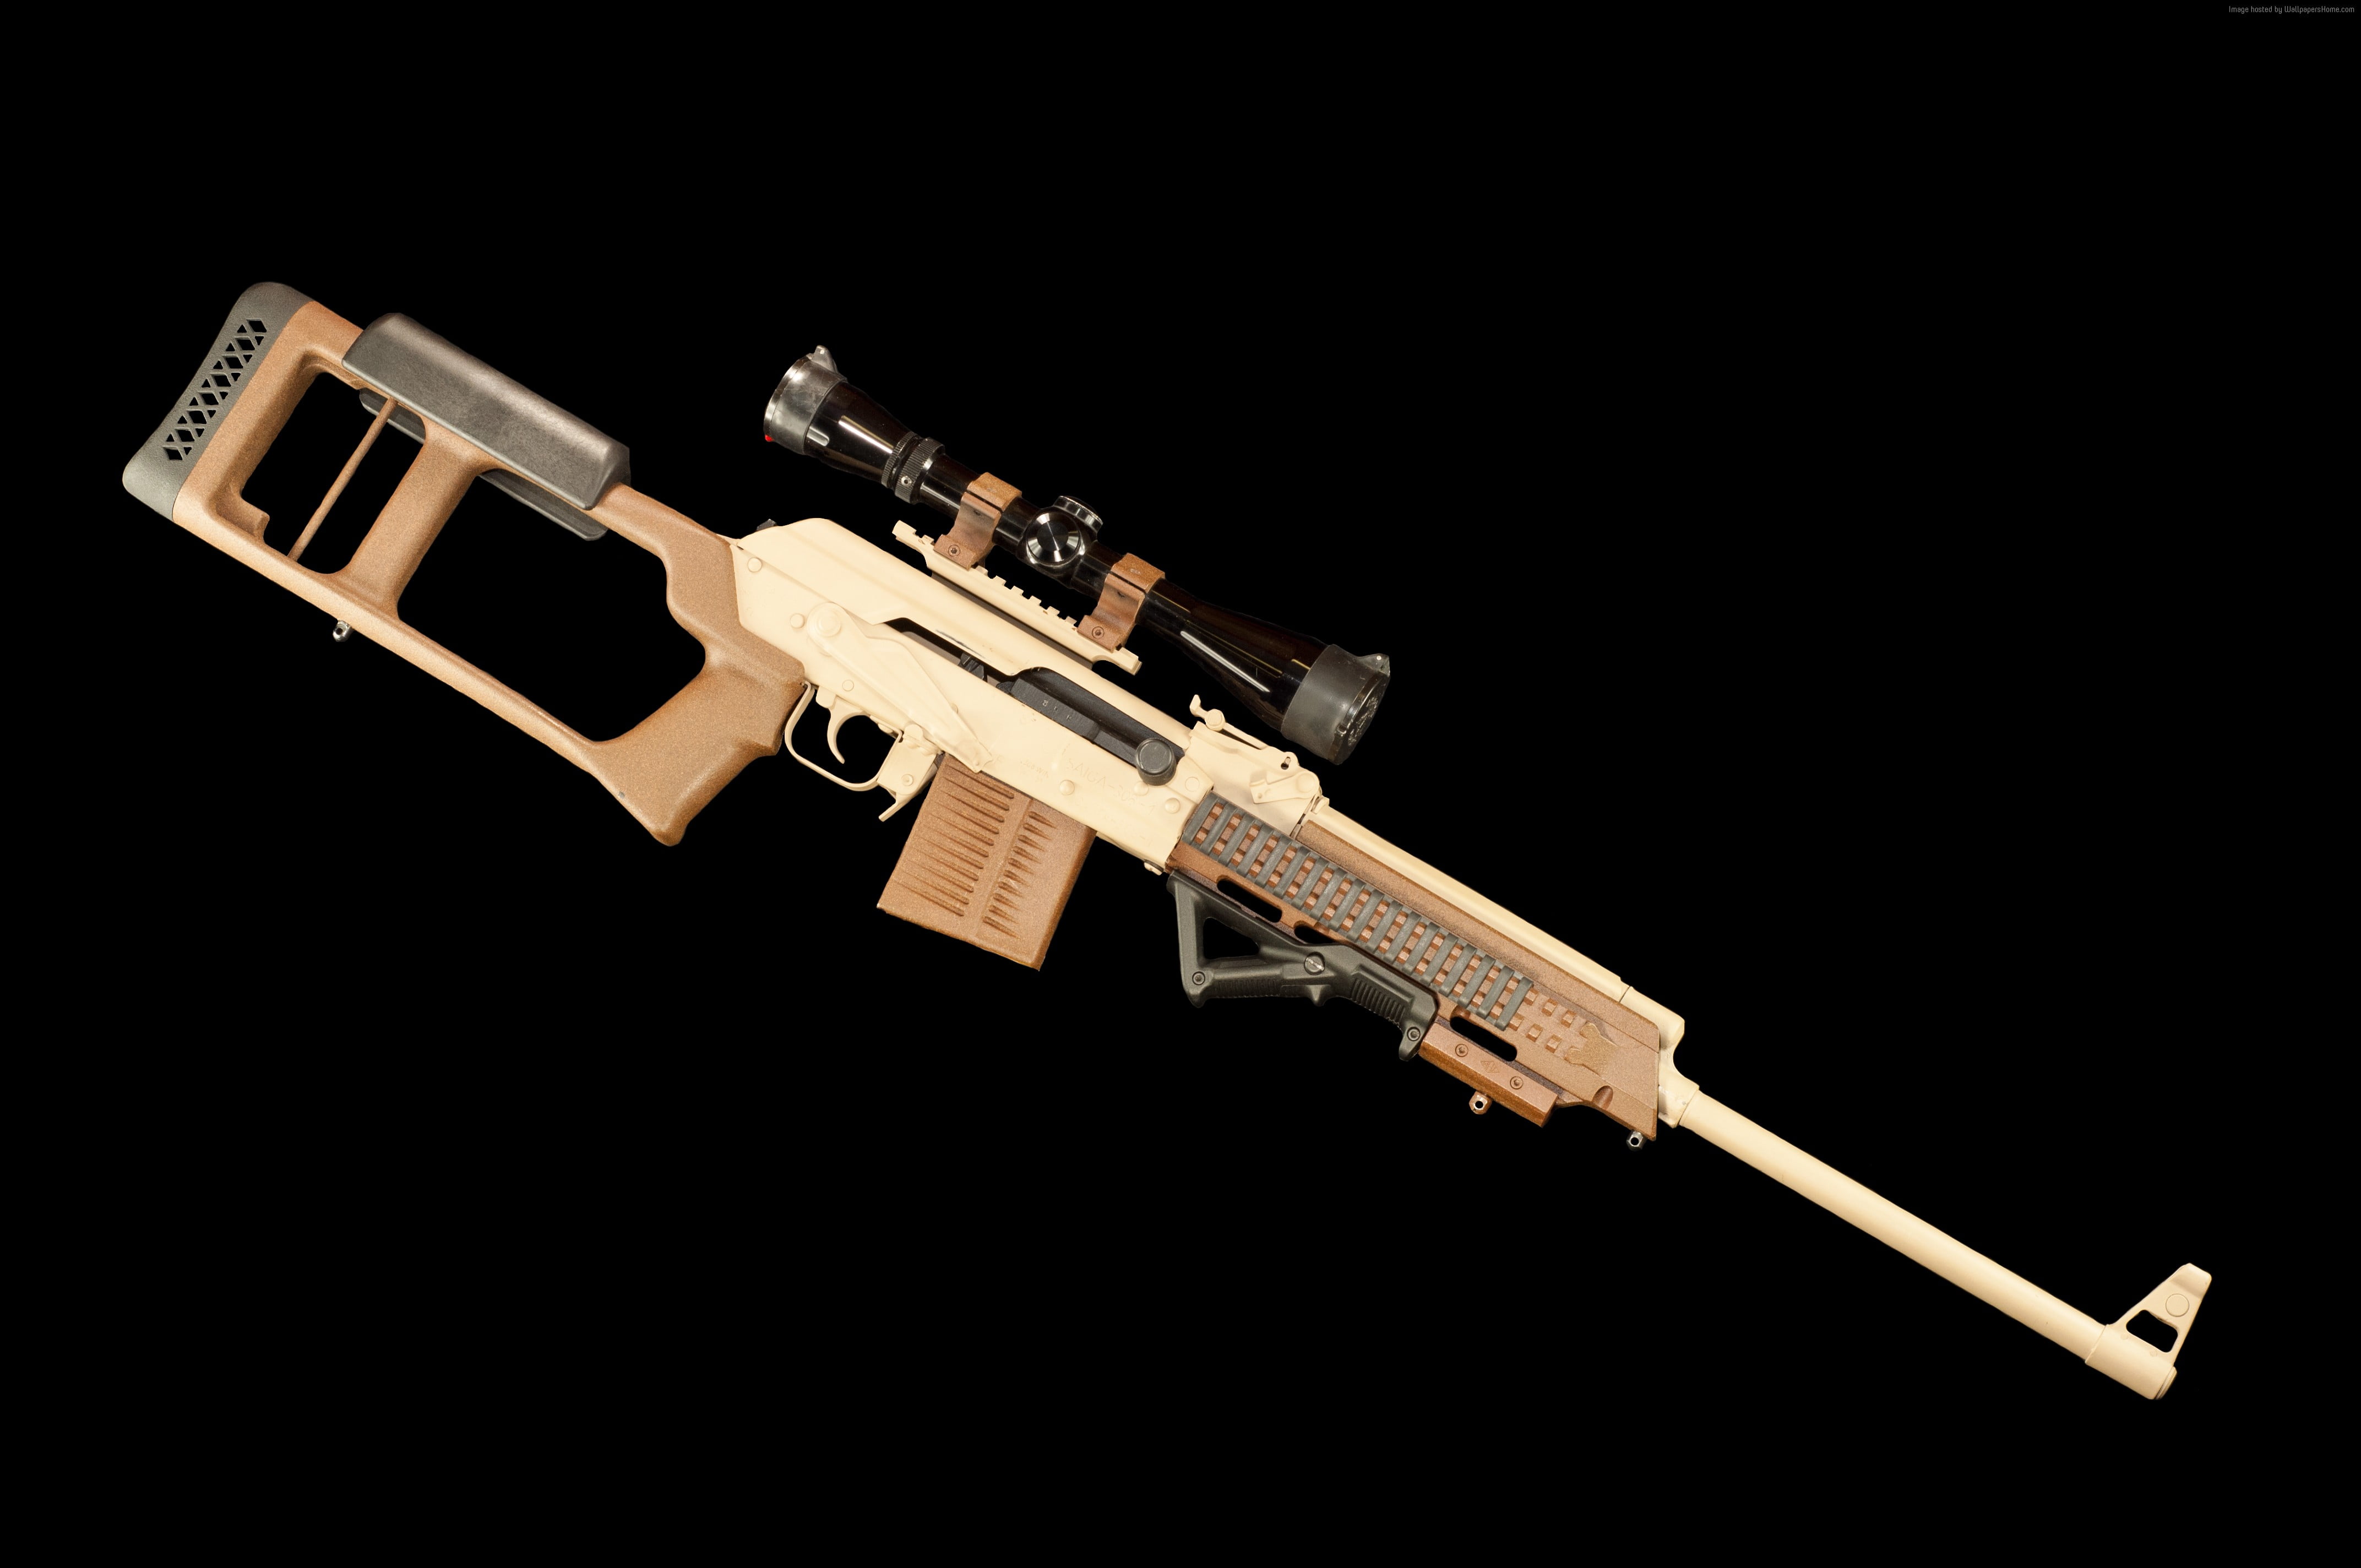 beige and white assault rifle with scope